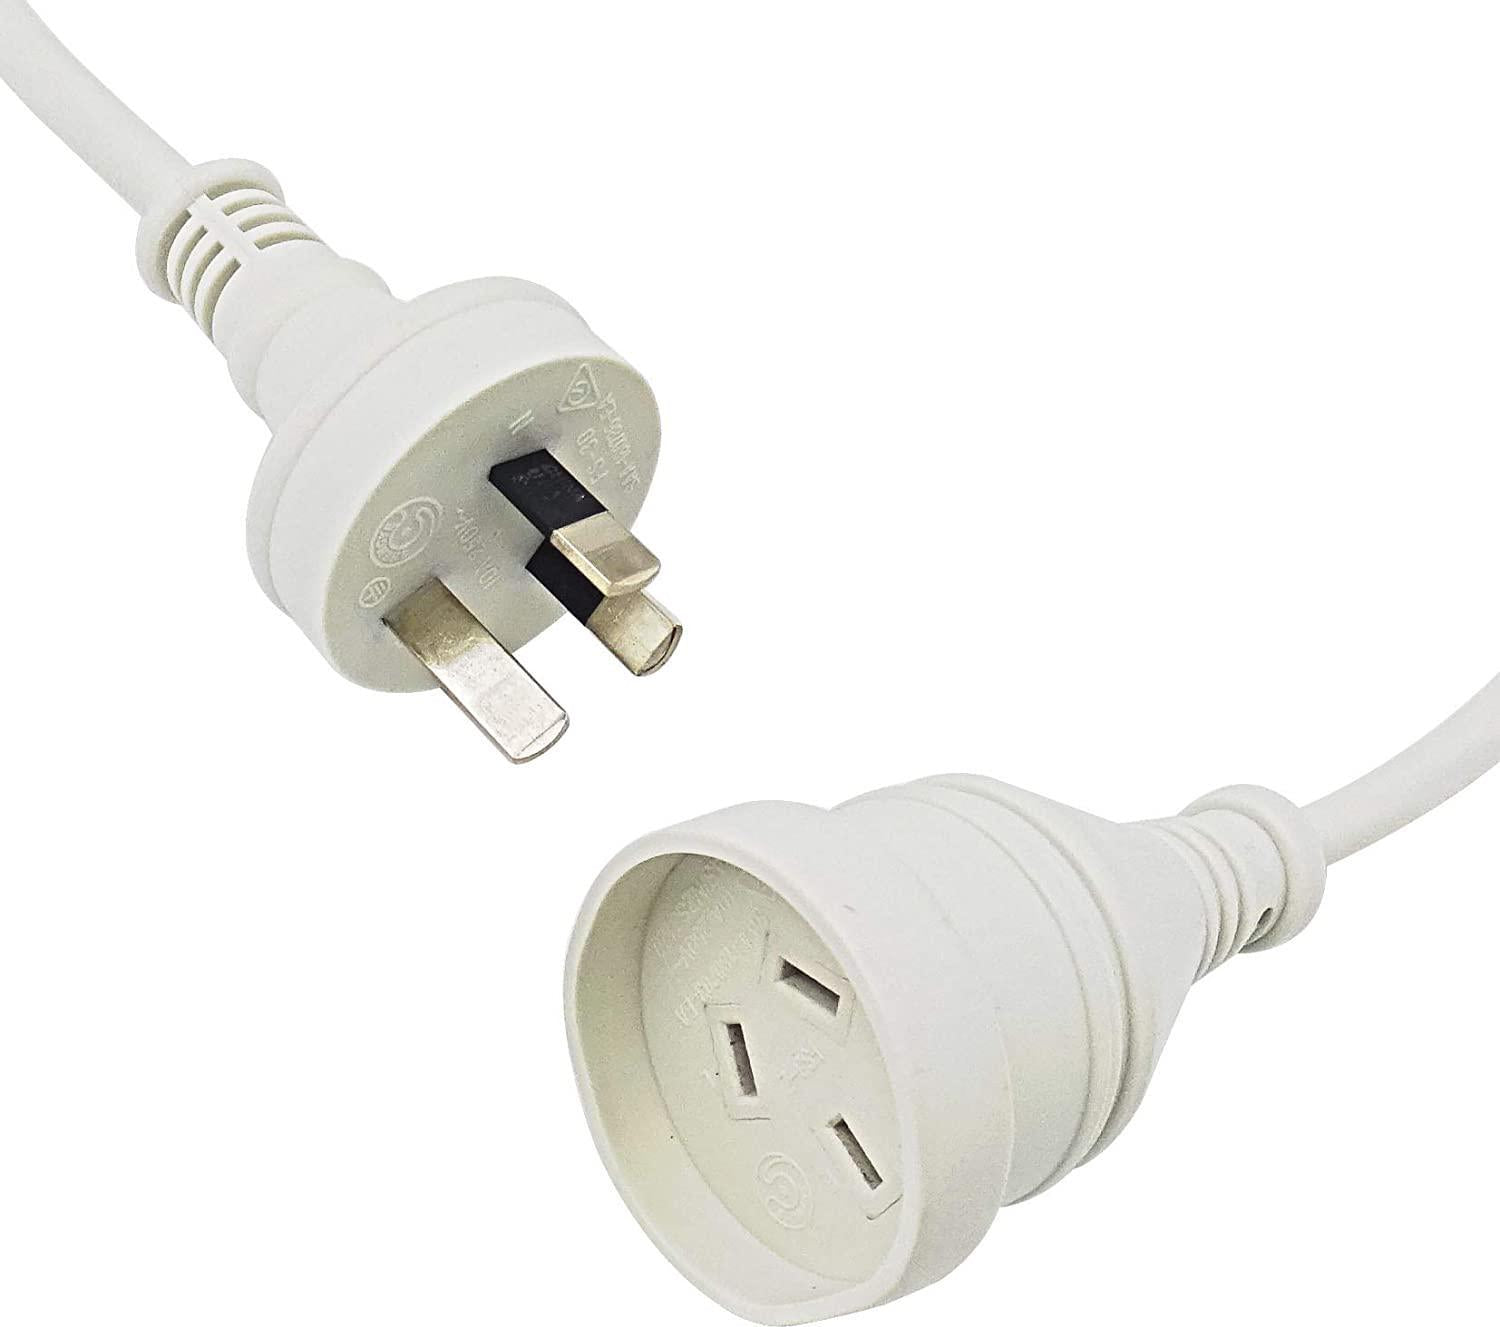 GOLINX, GOLINX 3m Power Extension Cord. 10A/240V/2400W Rated. RCM Approved. White.